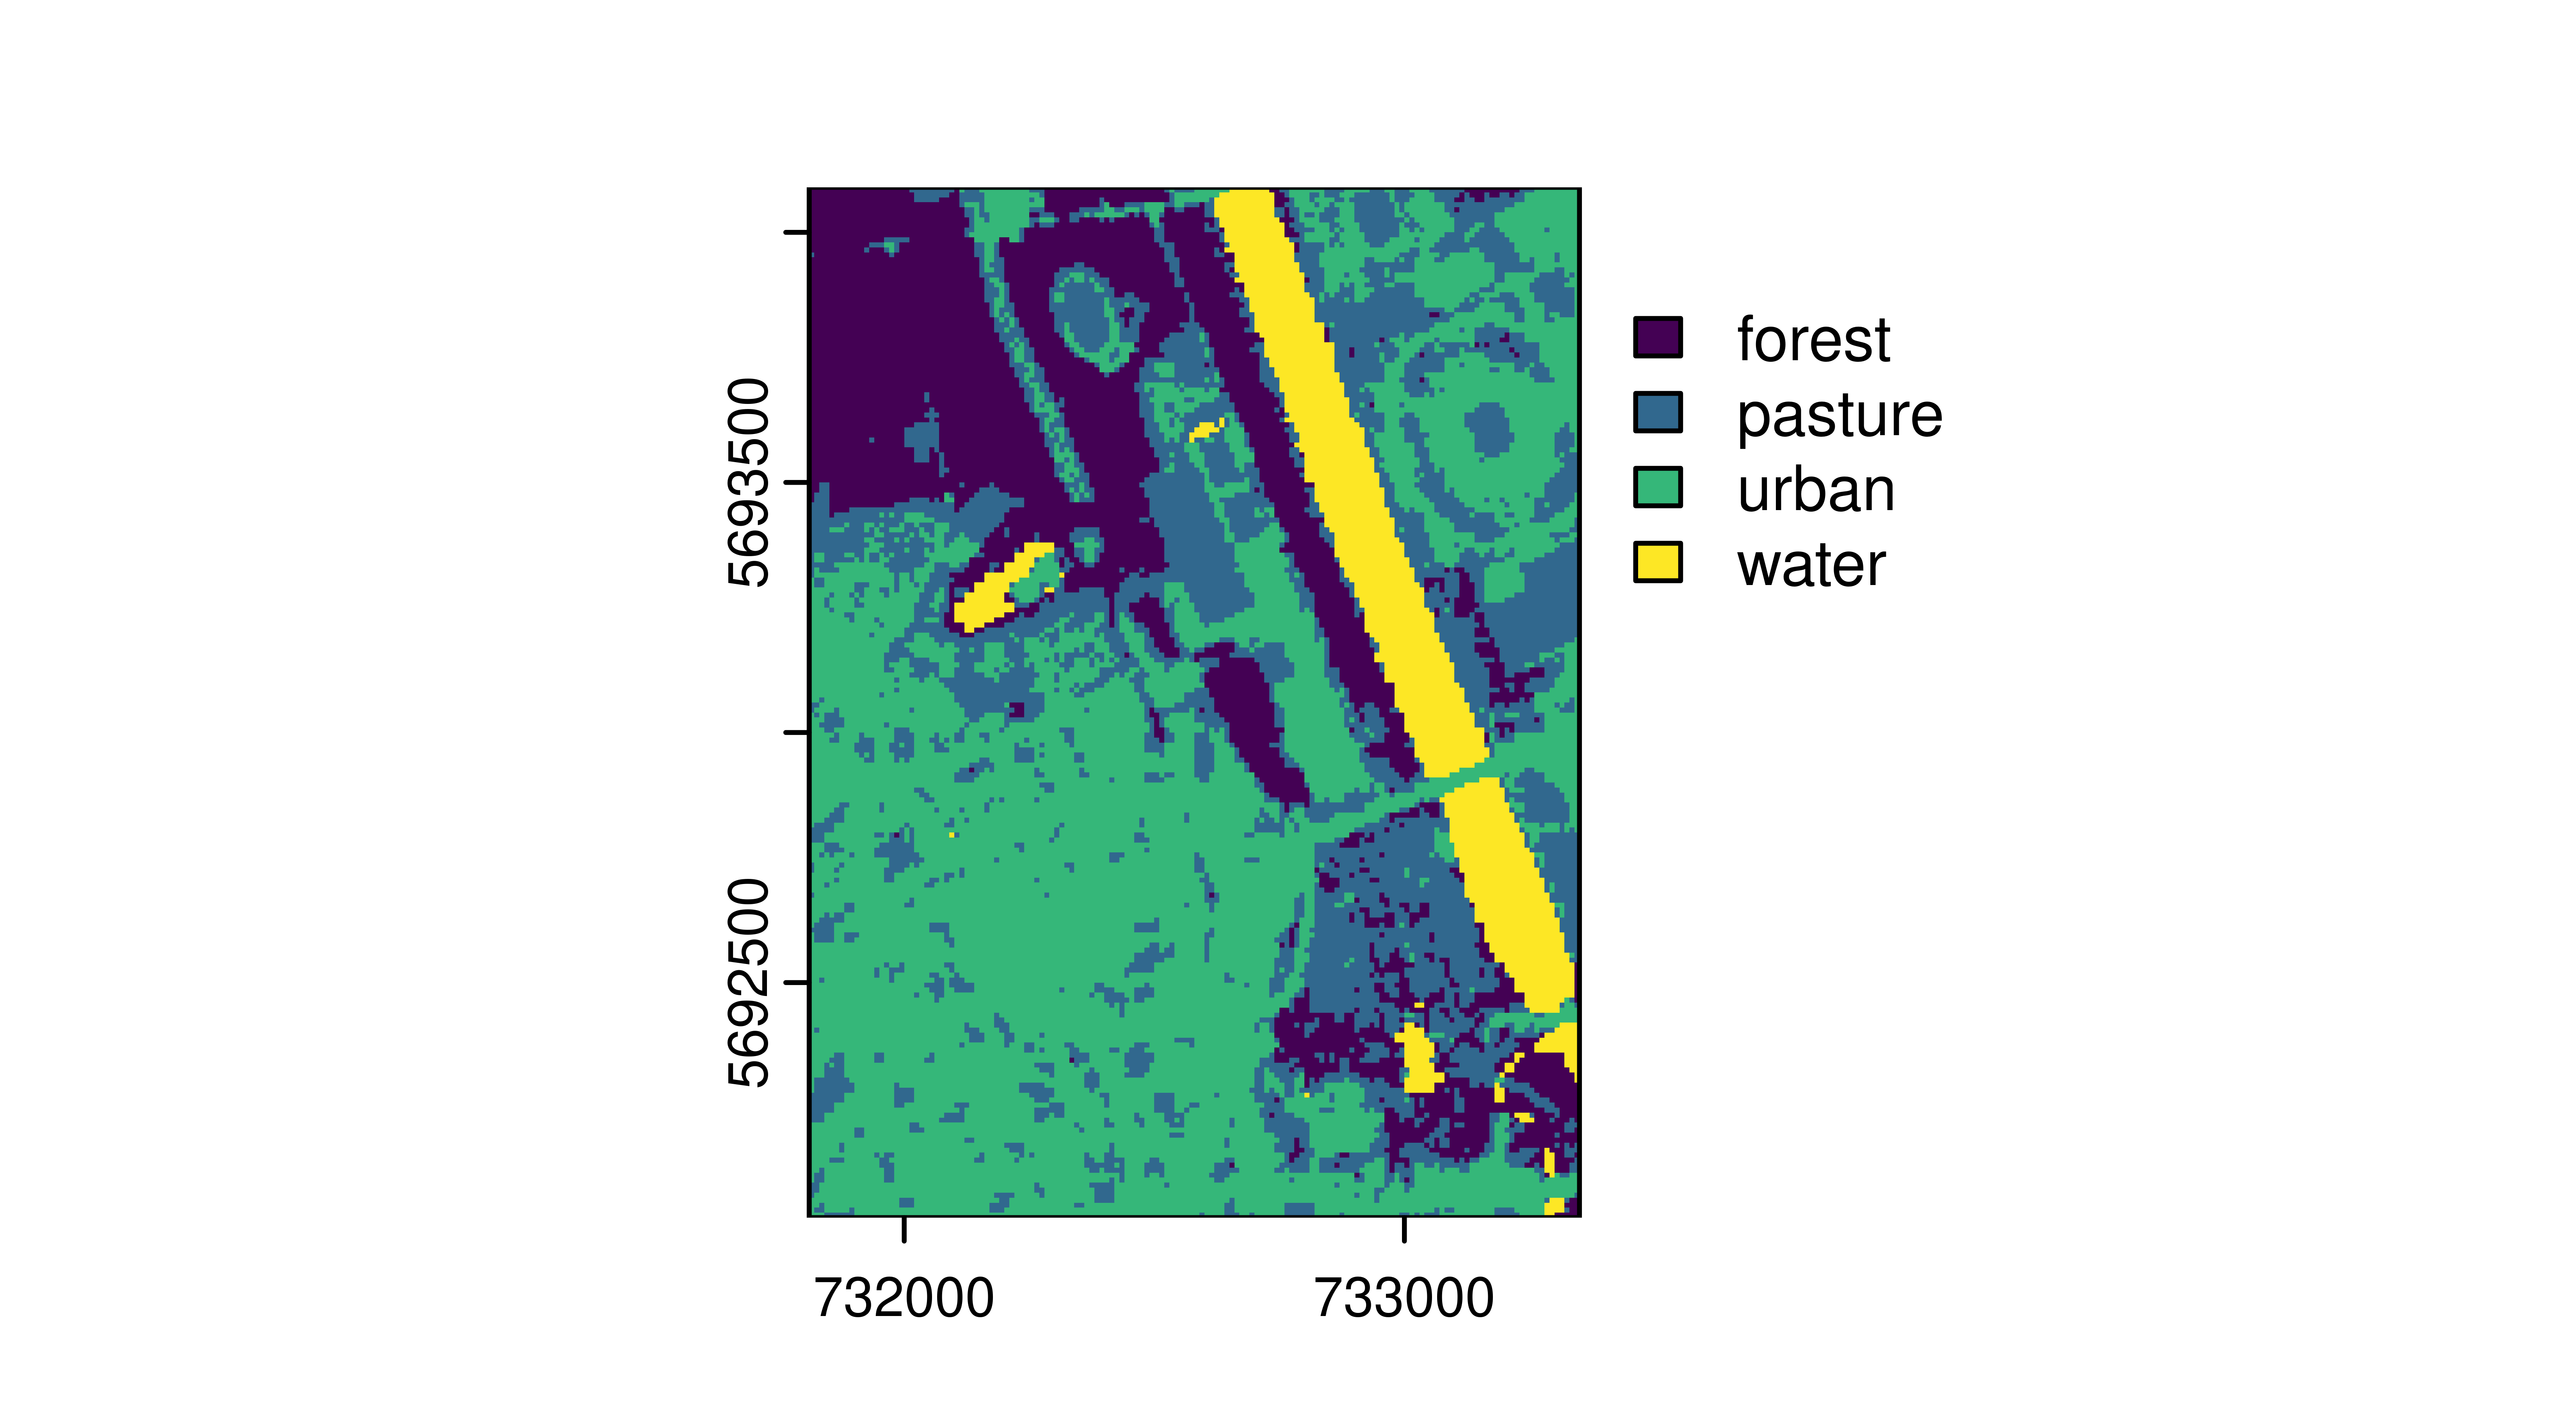 Very zoomed-in map with x-axis from 732000 to 733000 and 5692500 to 5693500 on y-axis. Different clusters are colored in green, blue, purple and yellow.